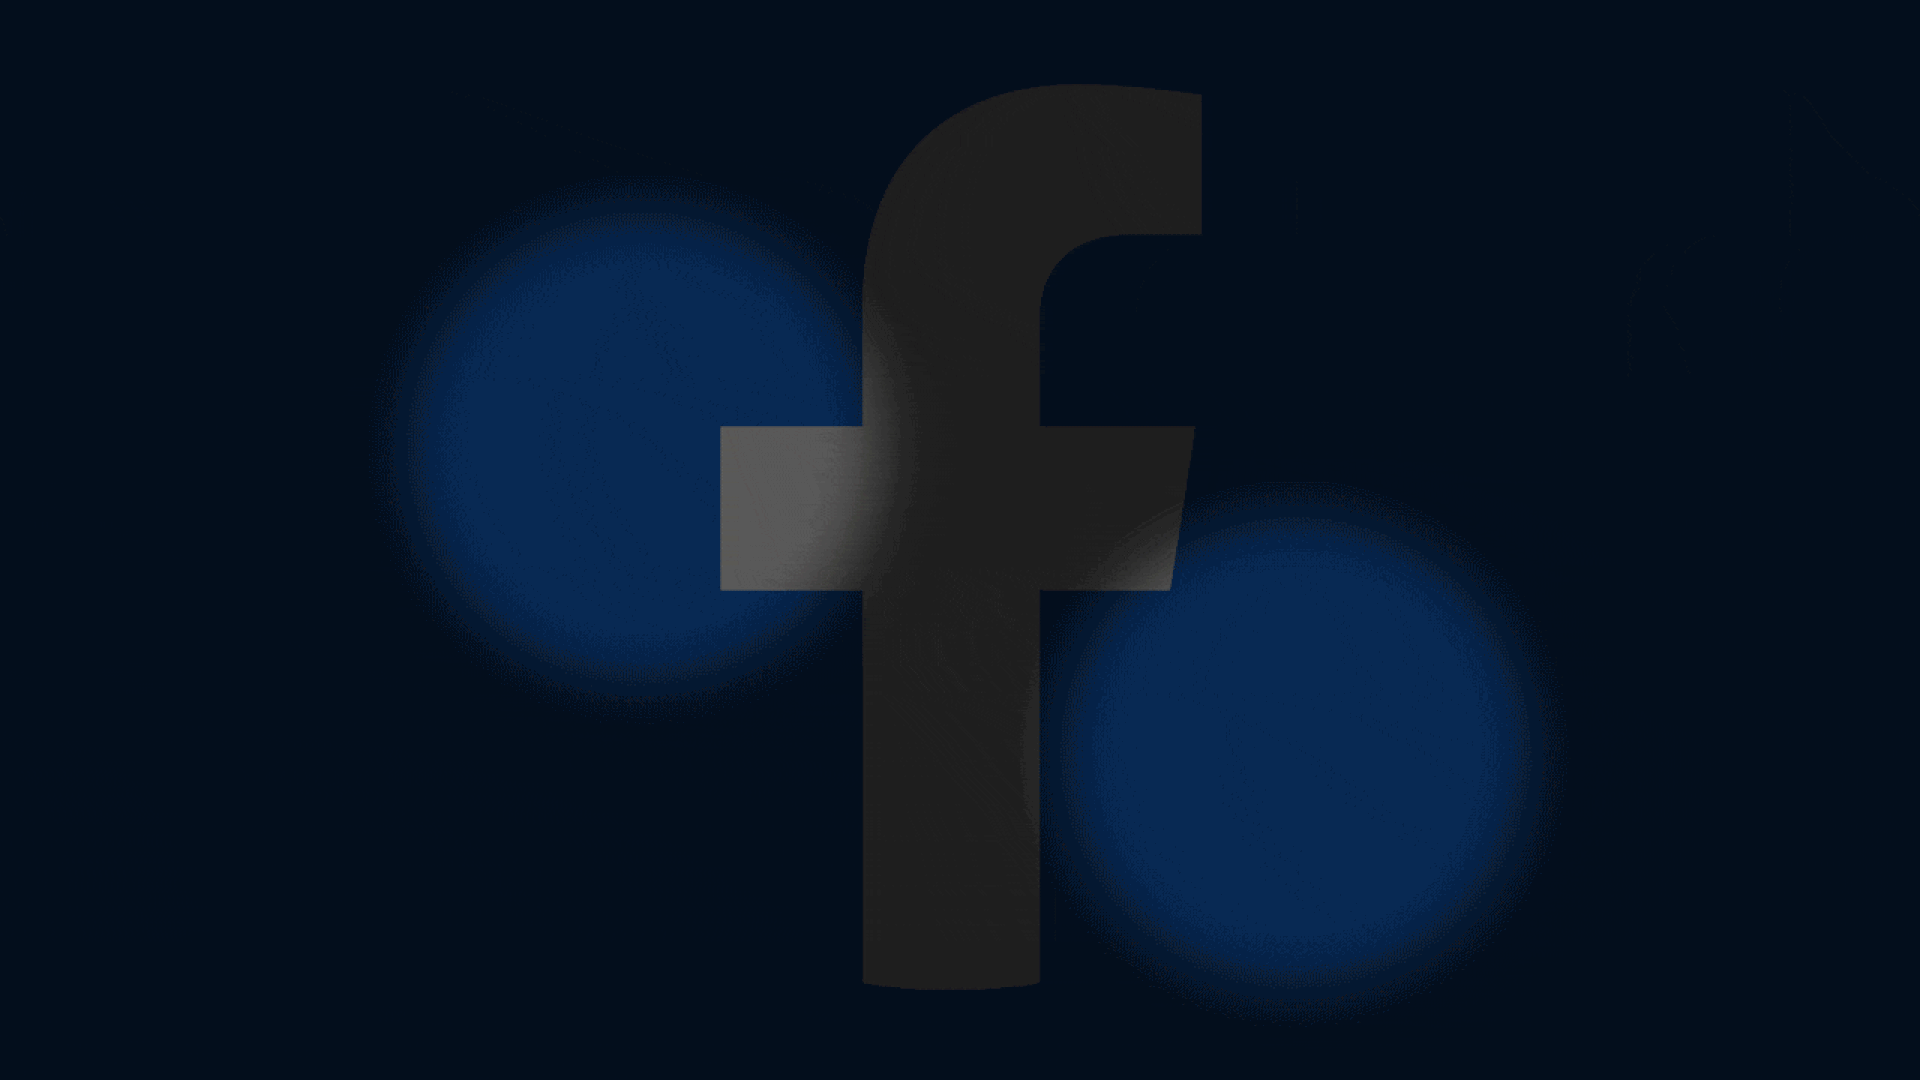 Facebook fights for its image